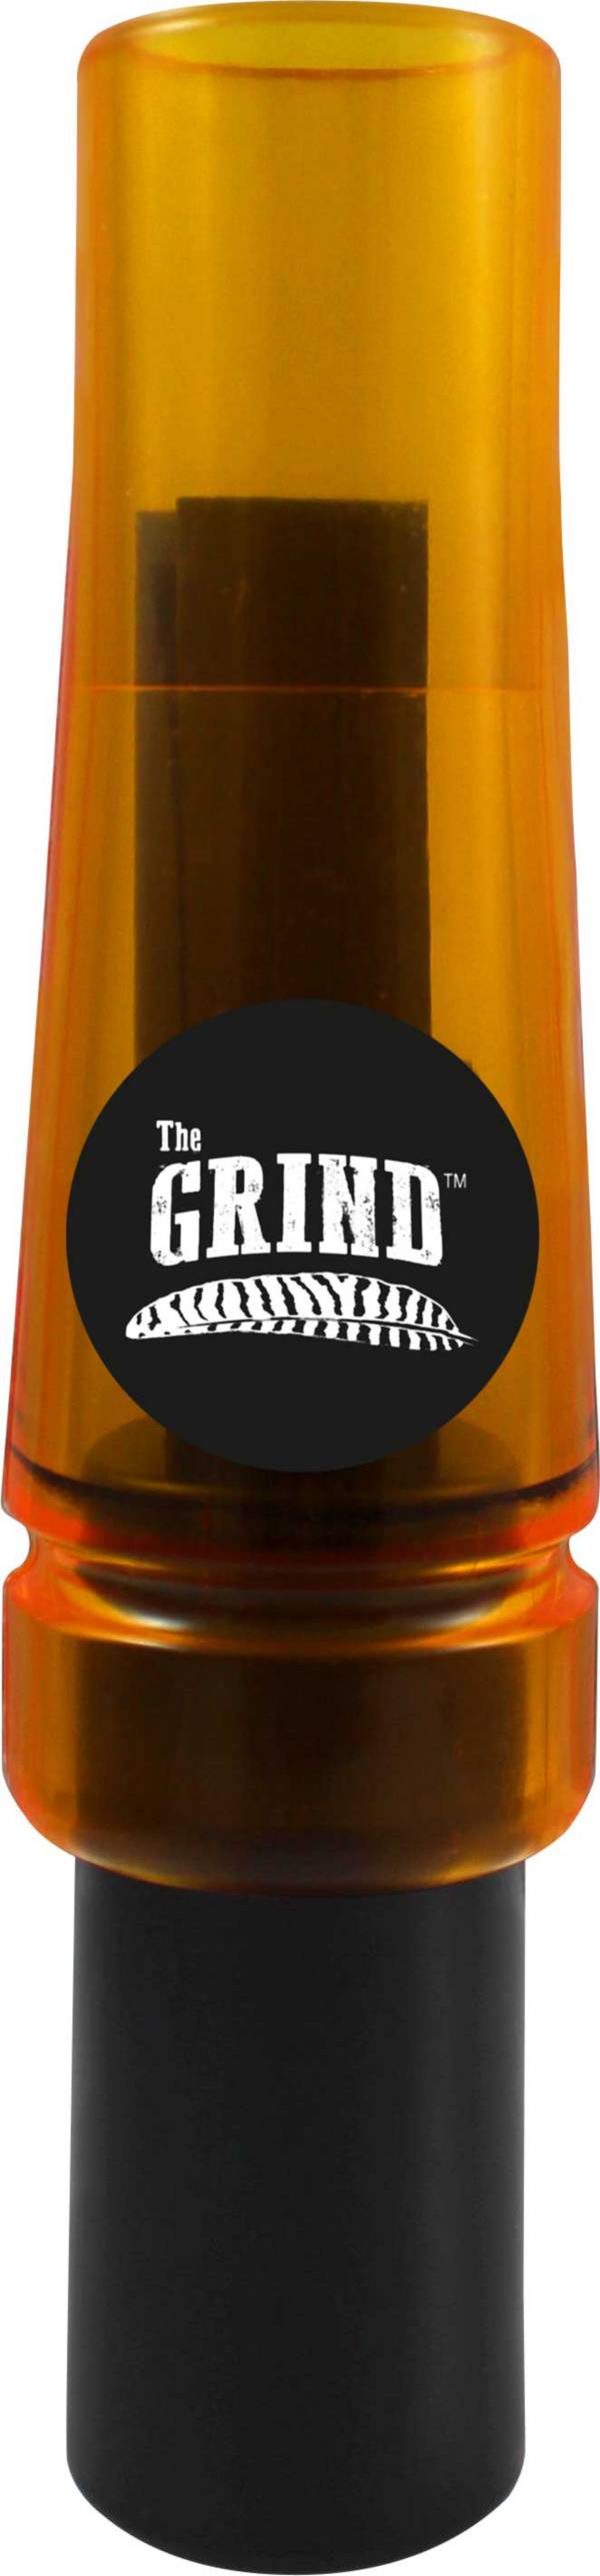 The Grind Outdoors Night Glider II Owl Call product image